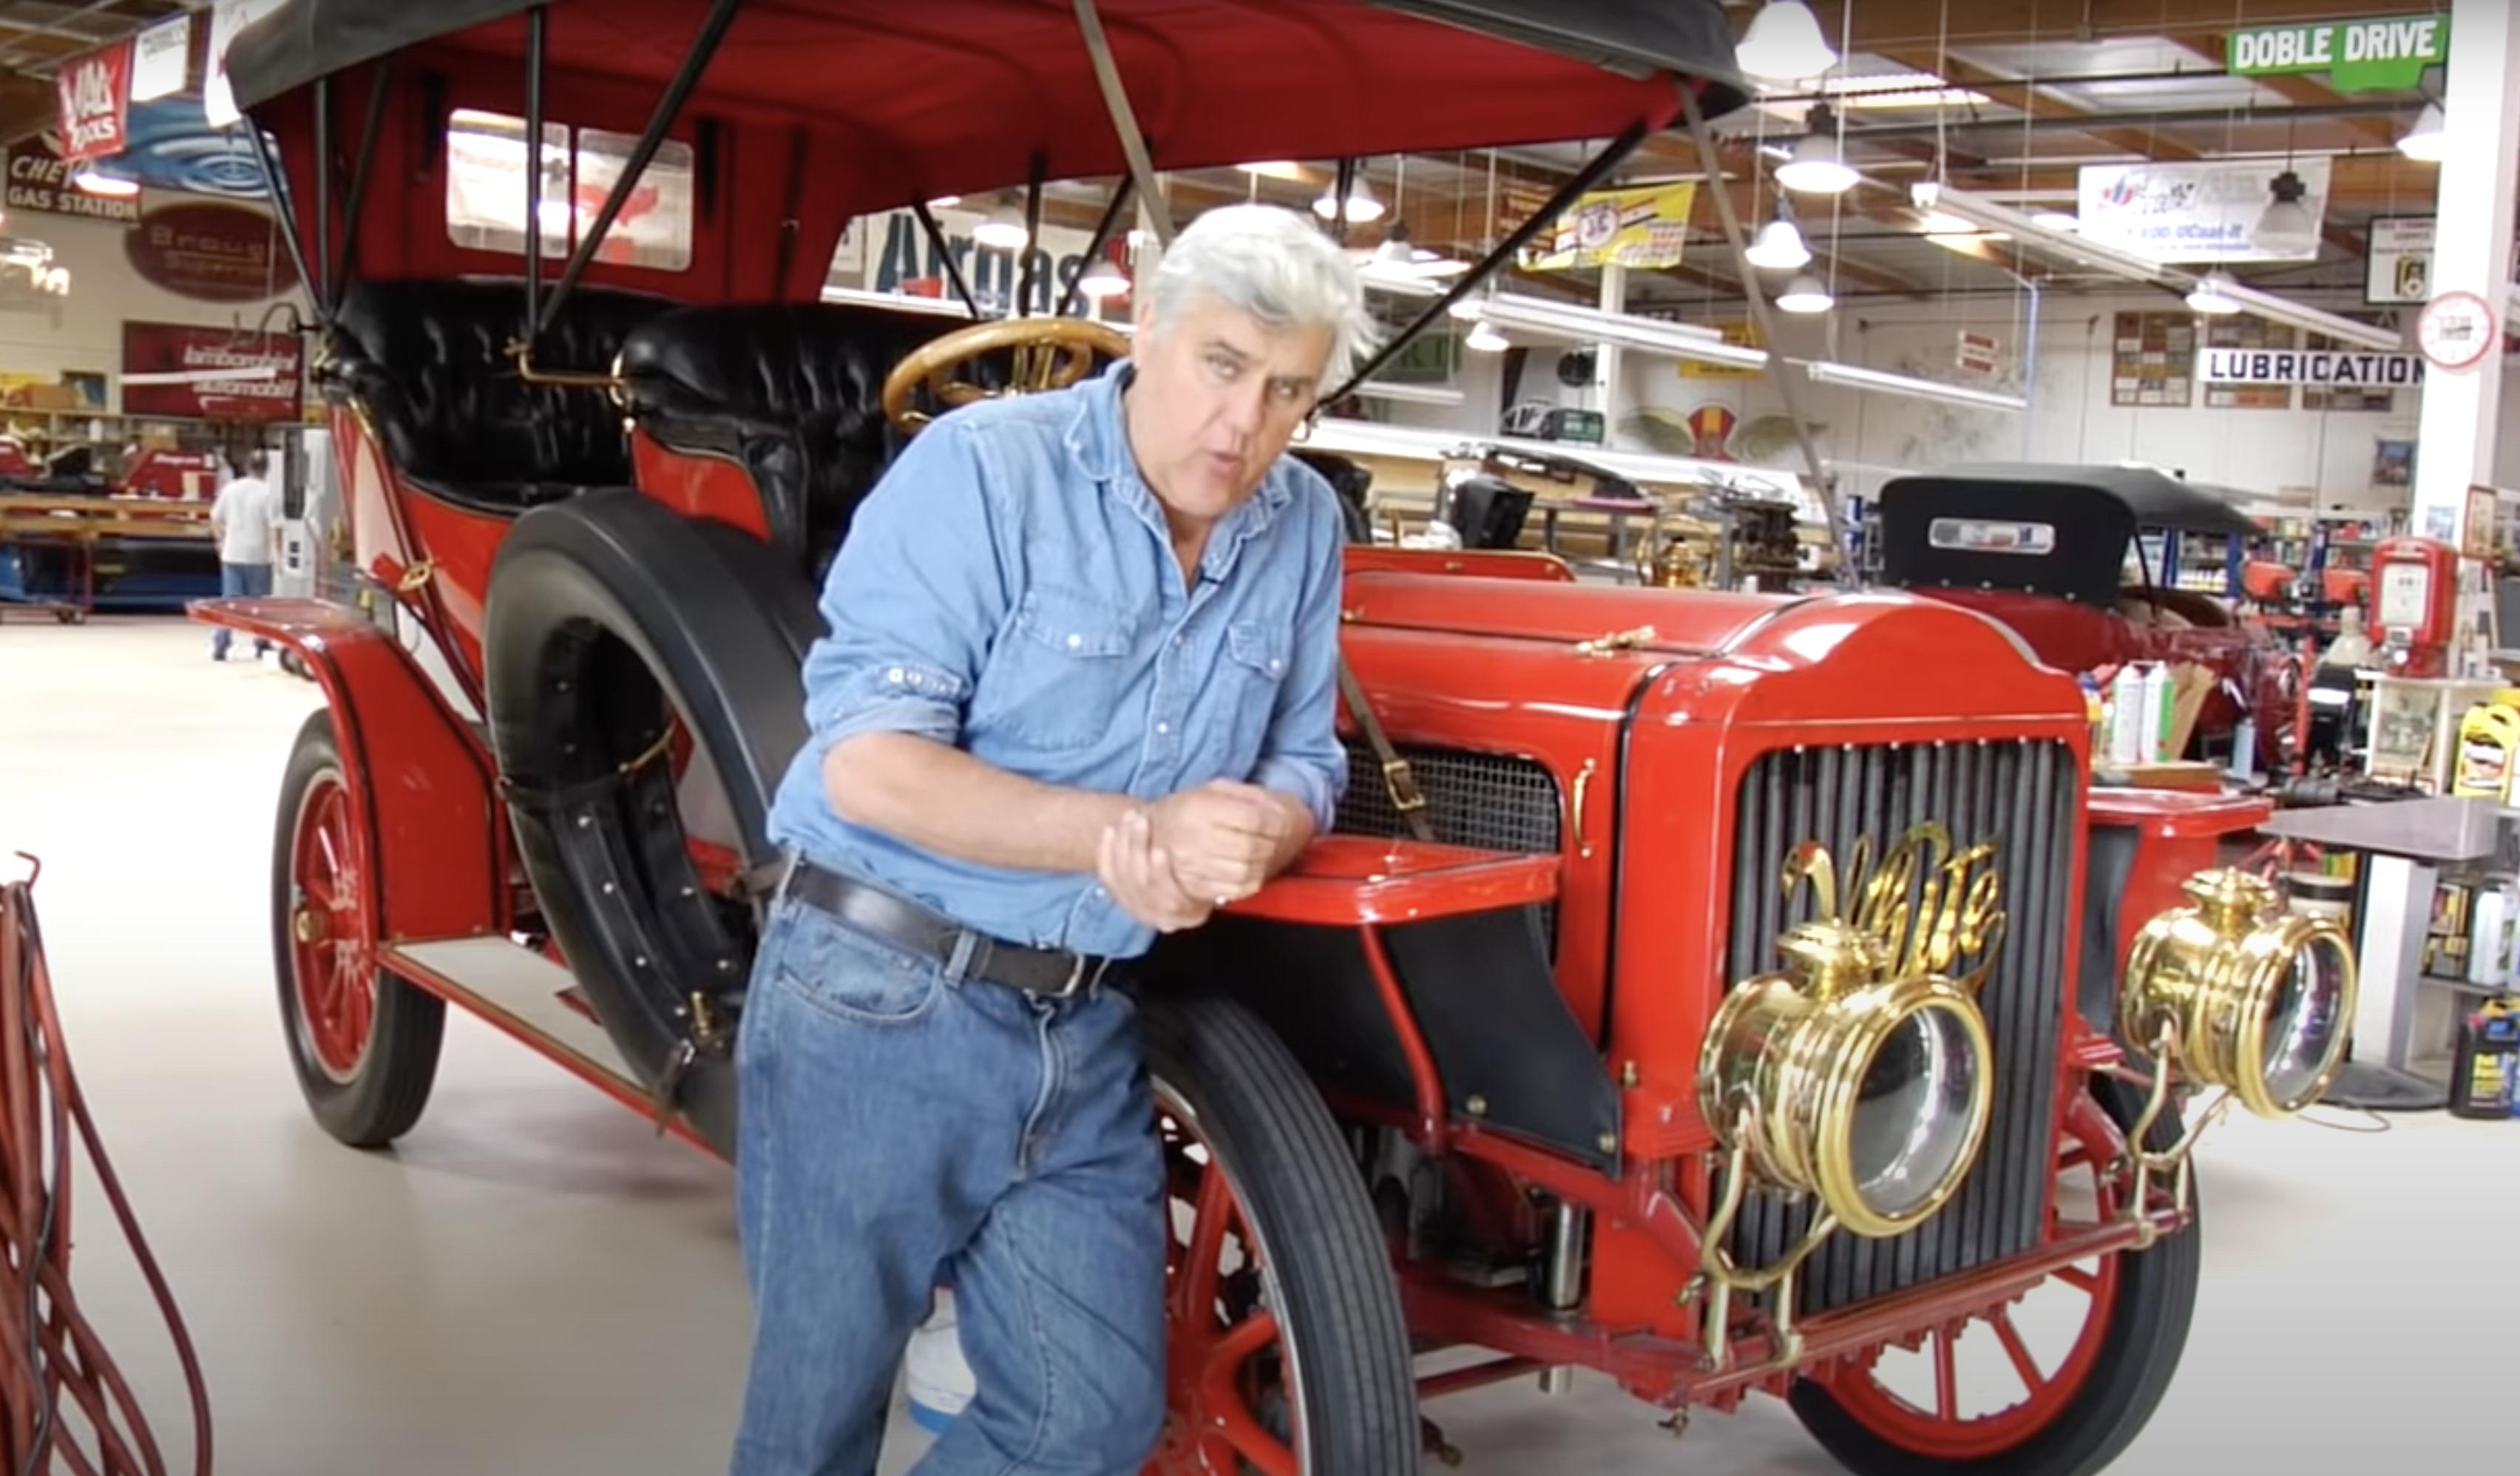 Why Jay Leno's steam car caused a gasoline fire